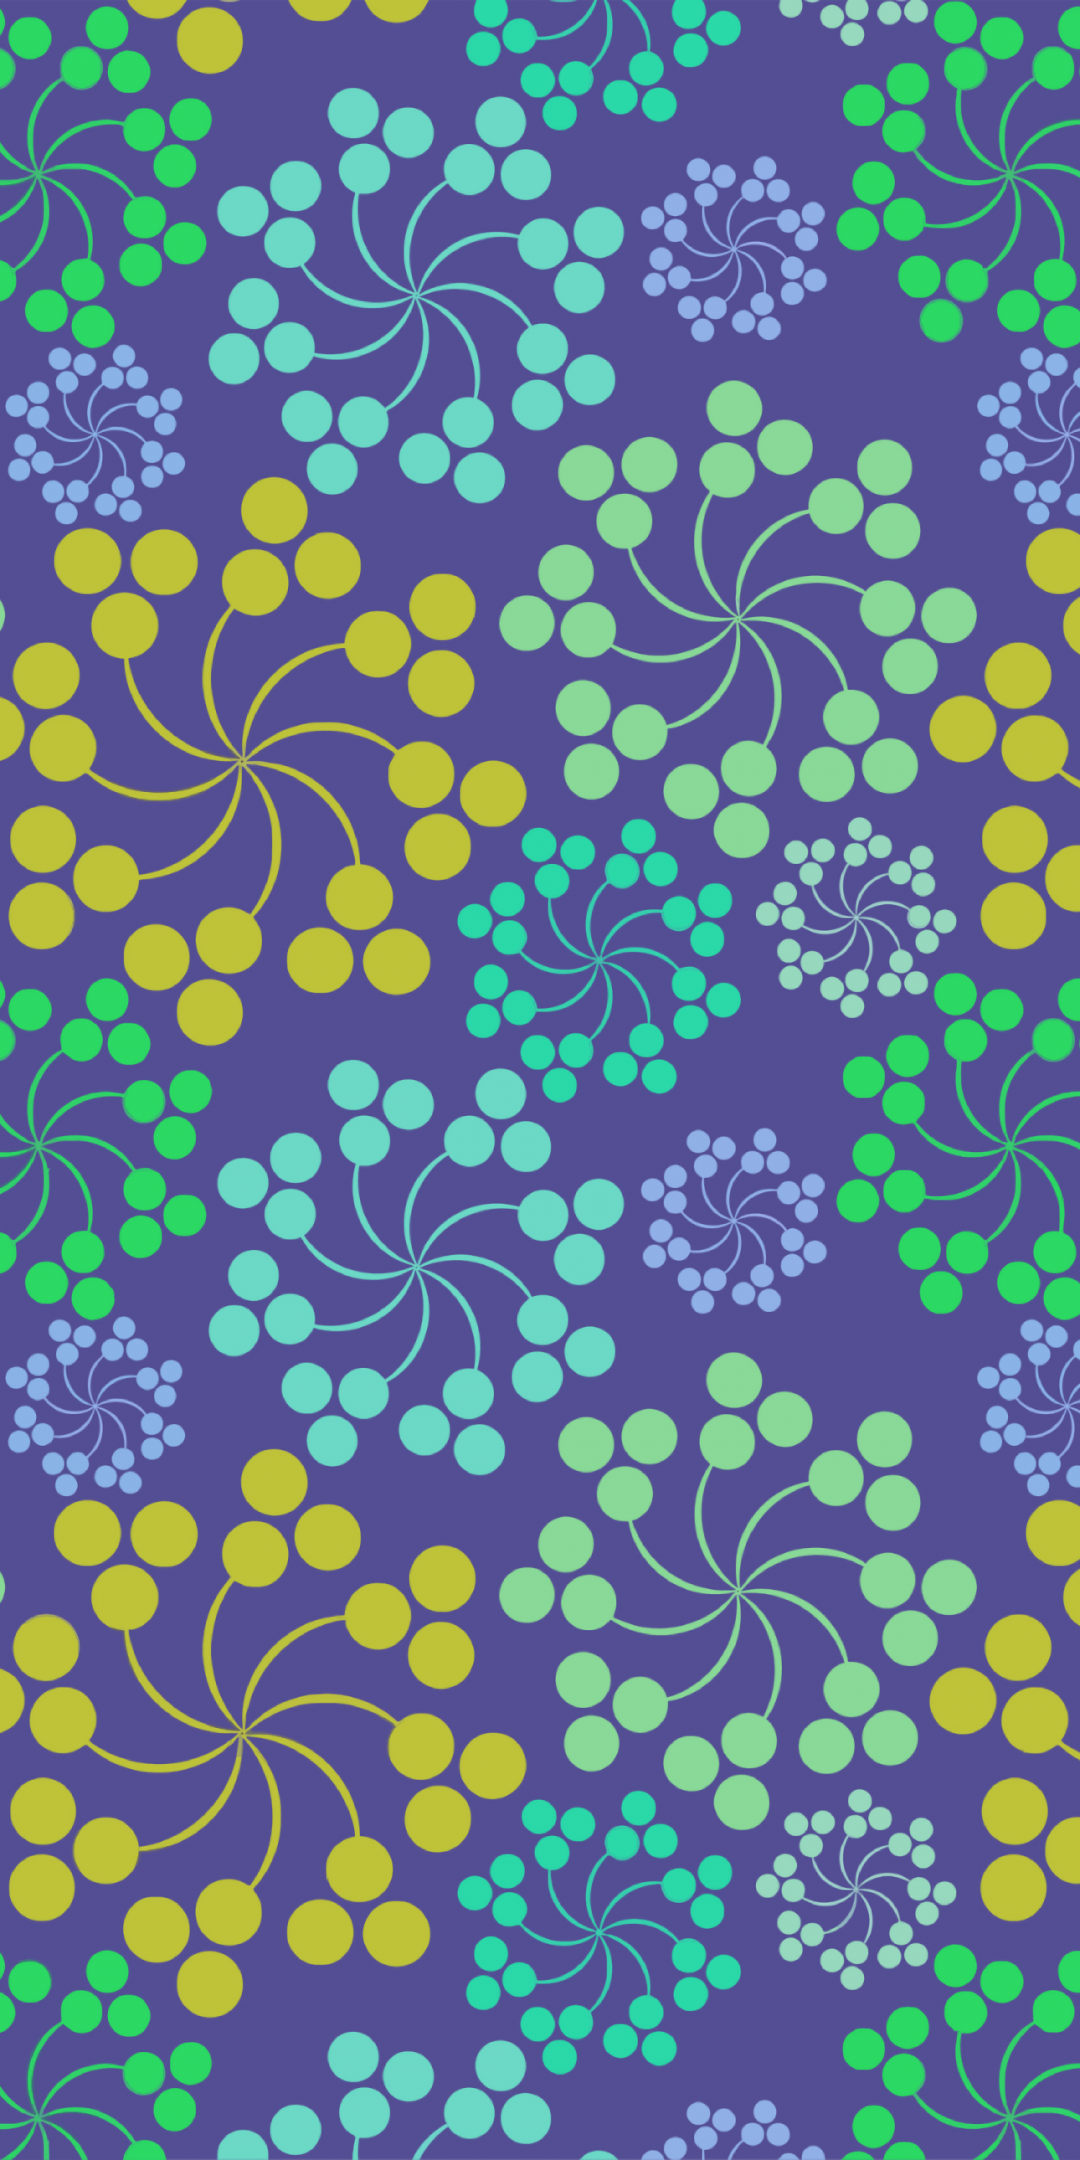 Patterns, circles, twisted, colorful, 1080x2160 wallpaper